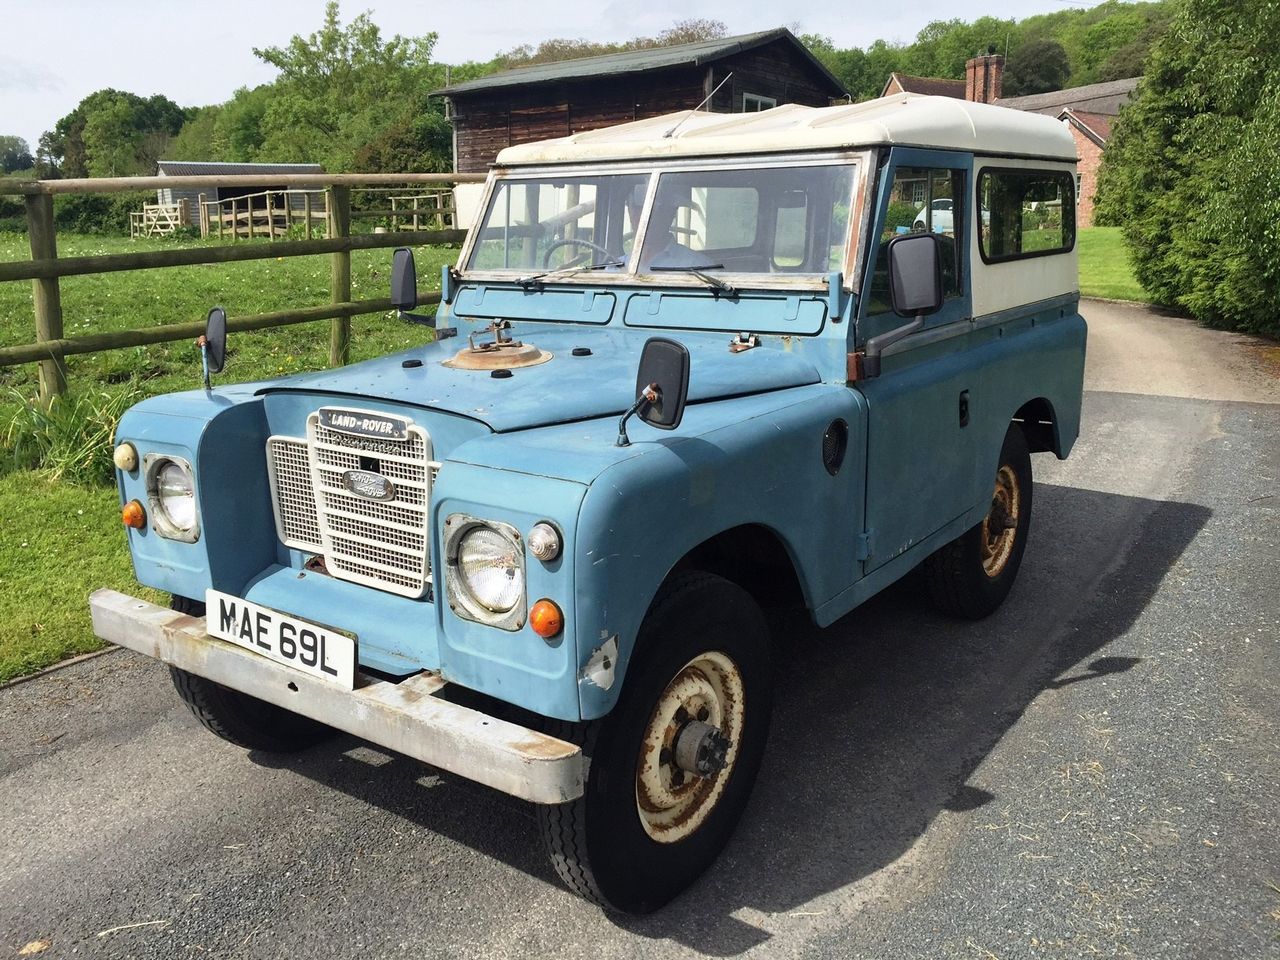 Land Rover Series III 88-inch